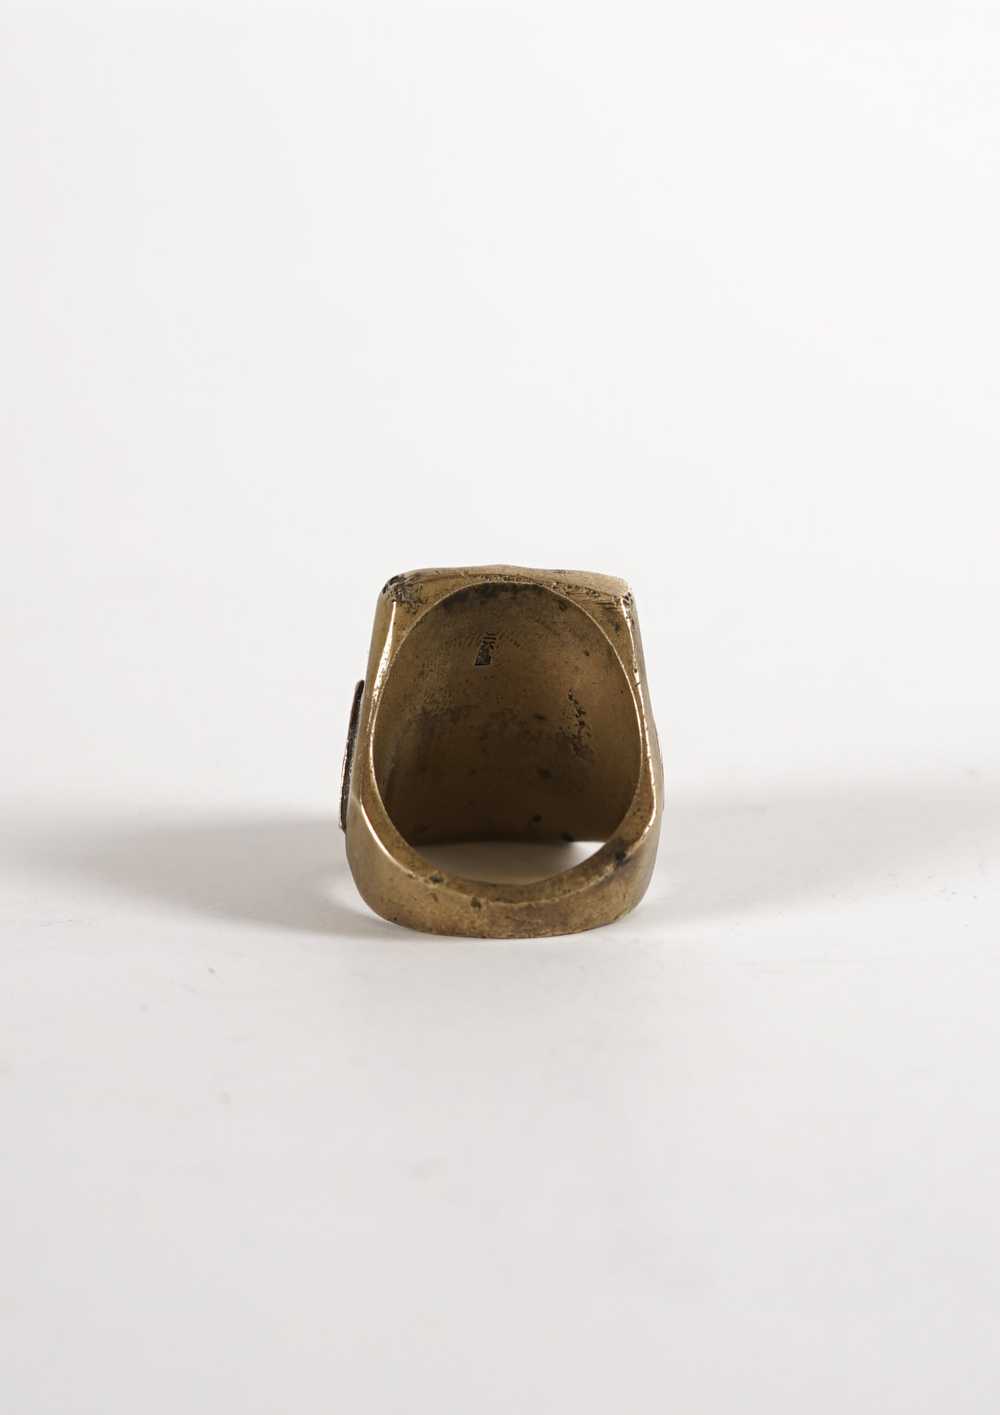 Mexican Biker Ring - image 4